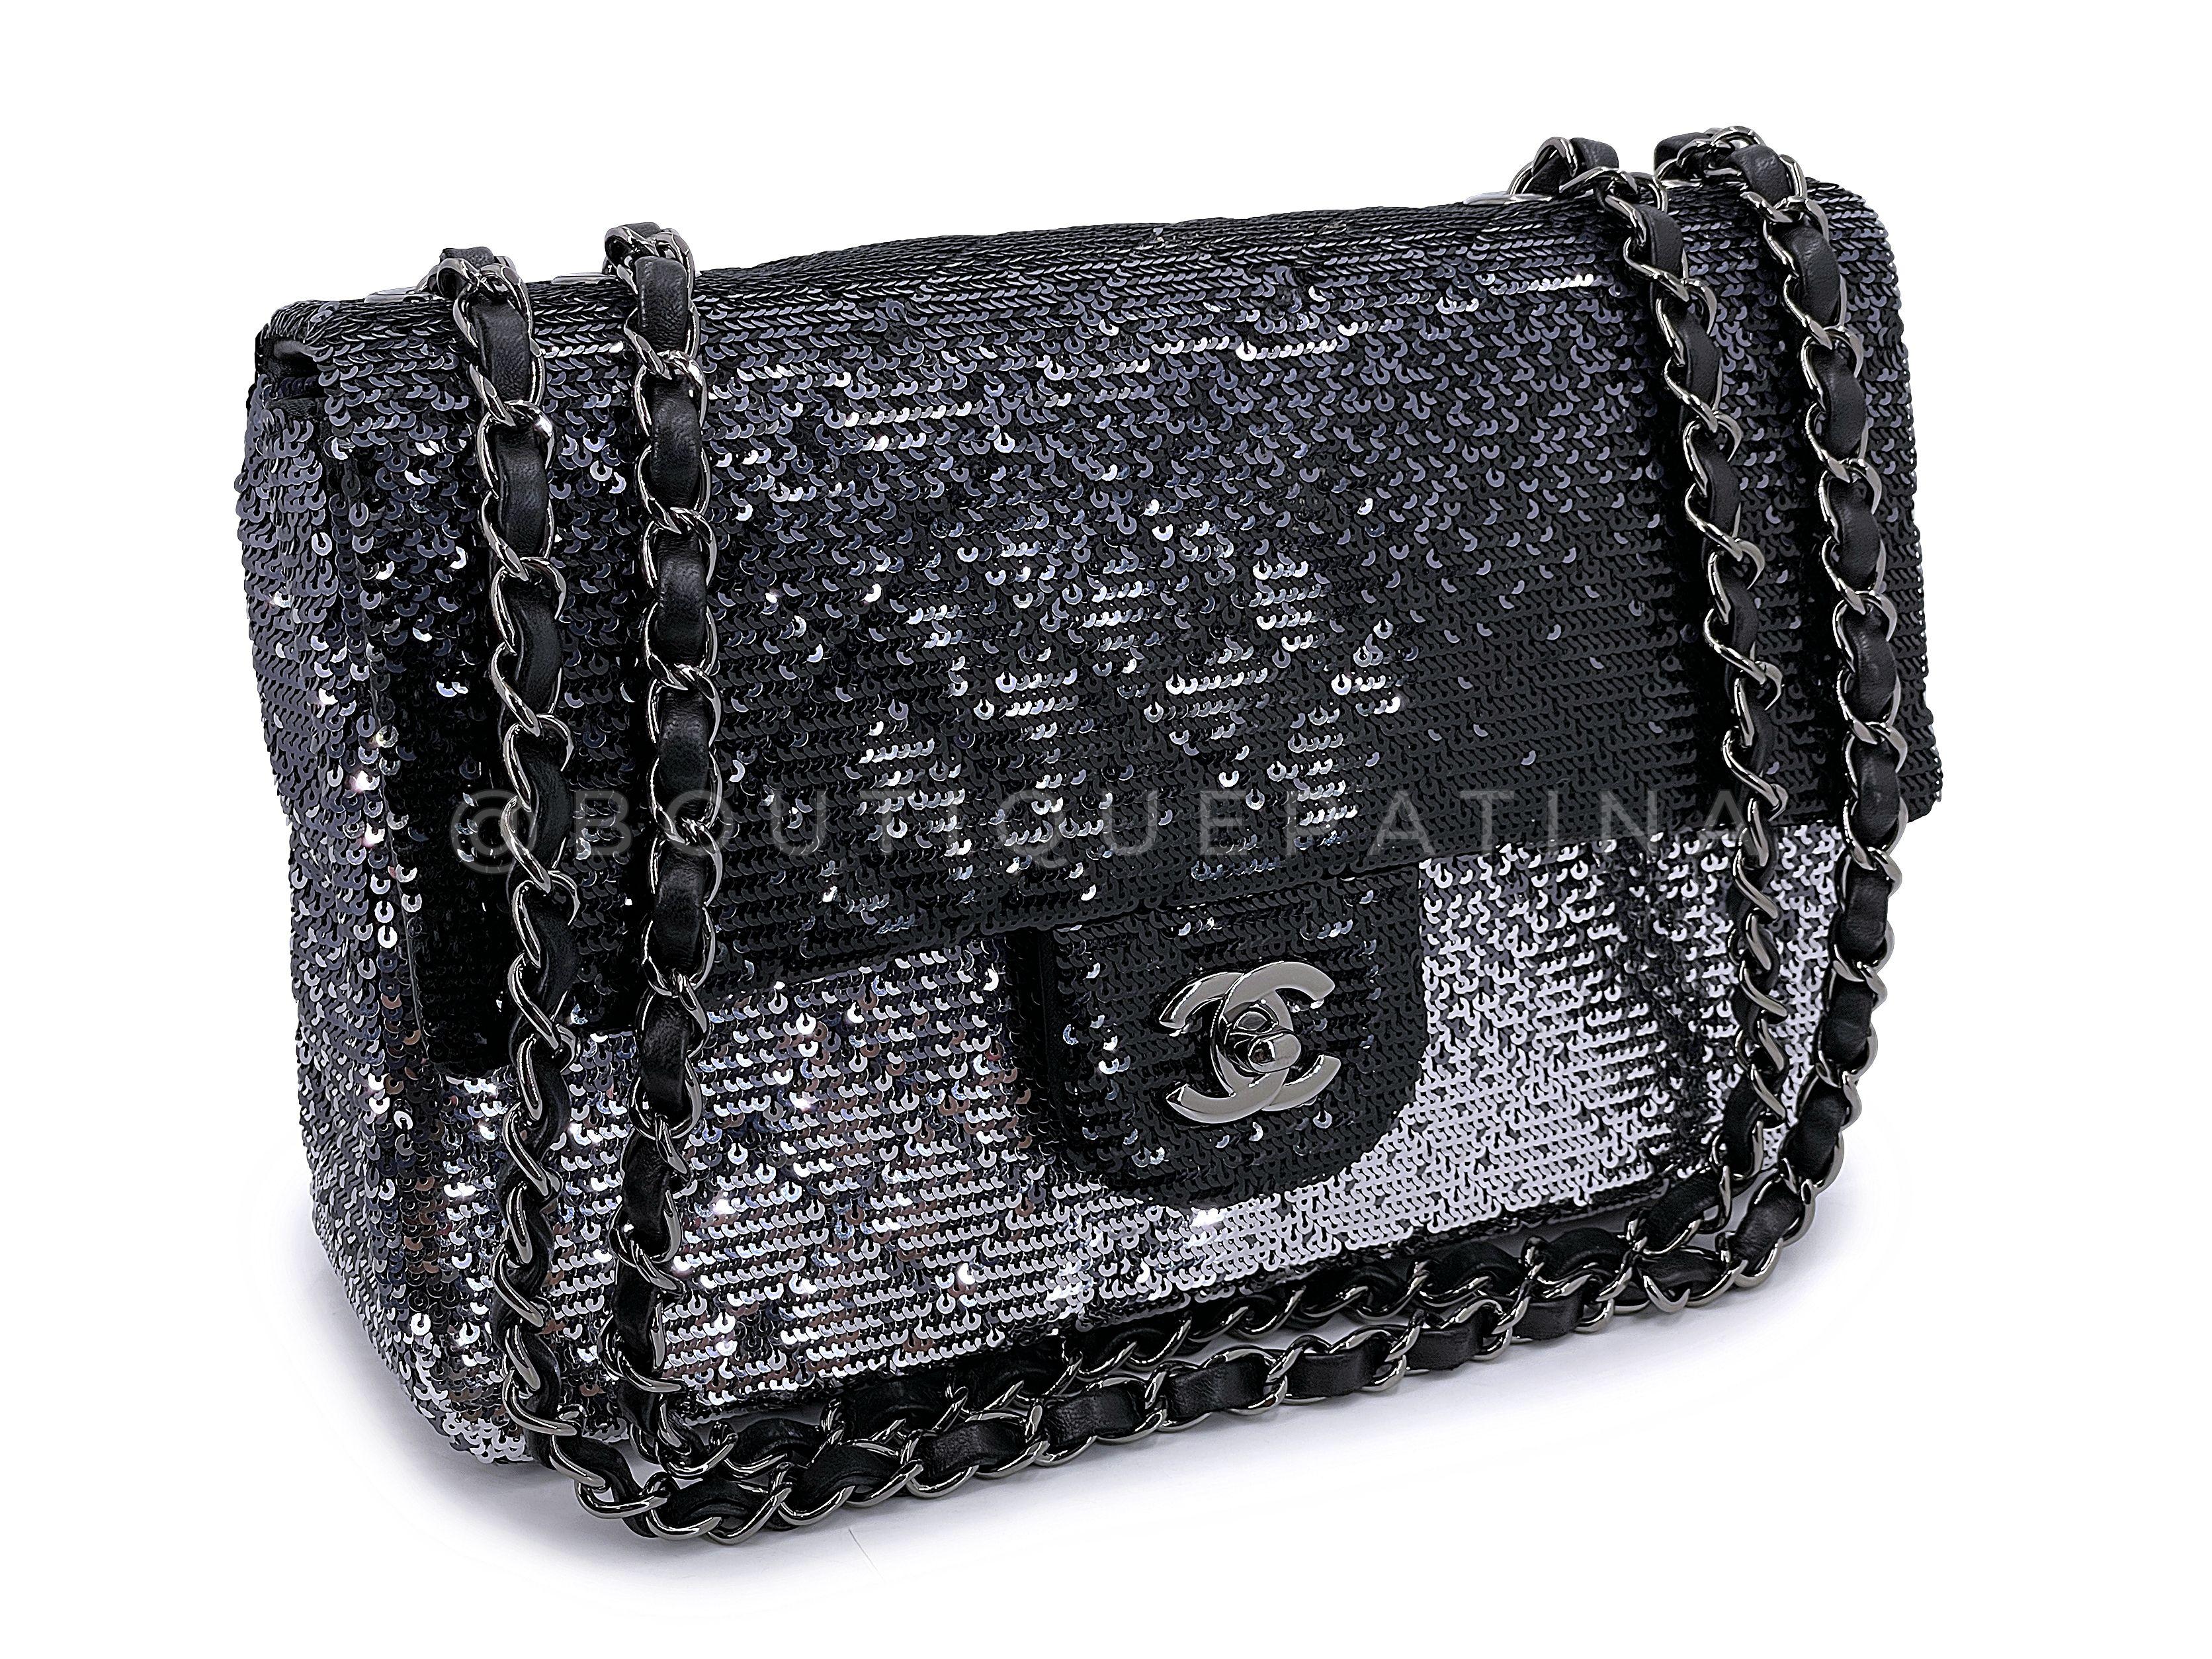 Store item: 67572
An intricate masterpiece of glittery sequin shimmer is this Chanel 2015 Black Silver Quilted Sequin Medium Classic Flap Bag. Unlike other sequin bags, this one is has neat, sleek panels with diamond quilts, and in an ombre shade